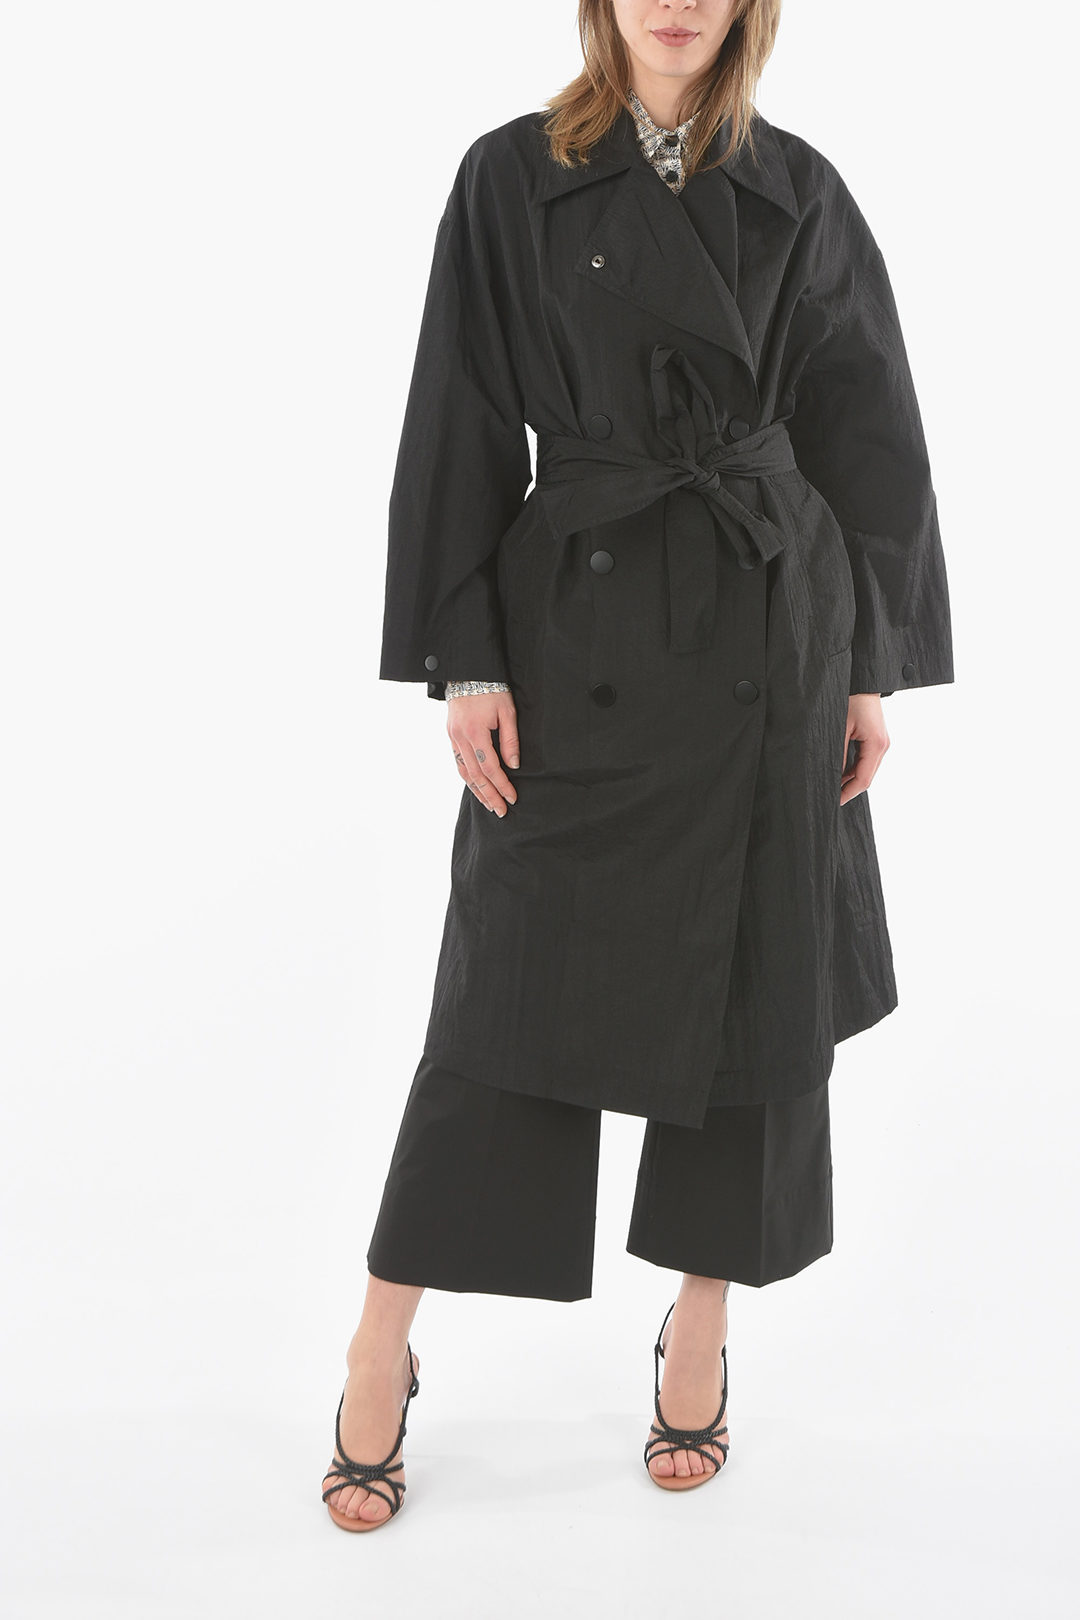 Rodebjer Double Breasted GEMMA Trench with Belt women - Glamood Outlet